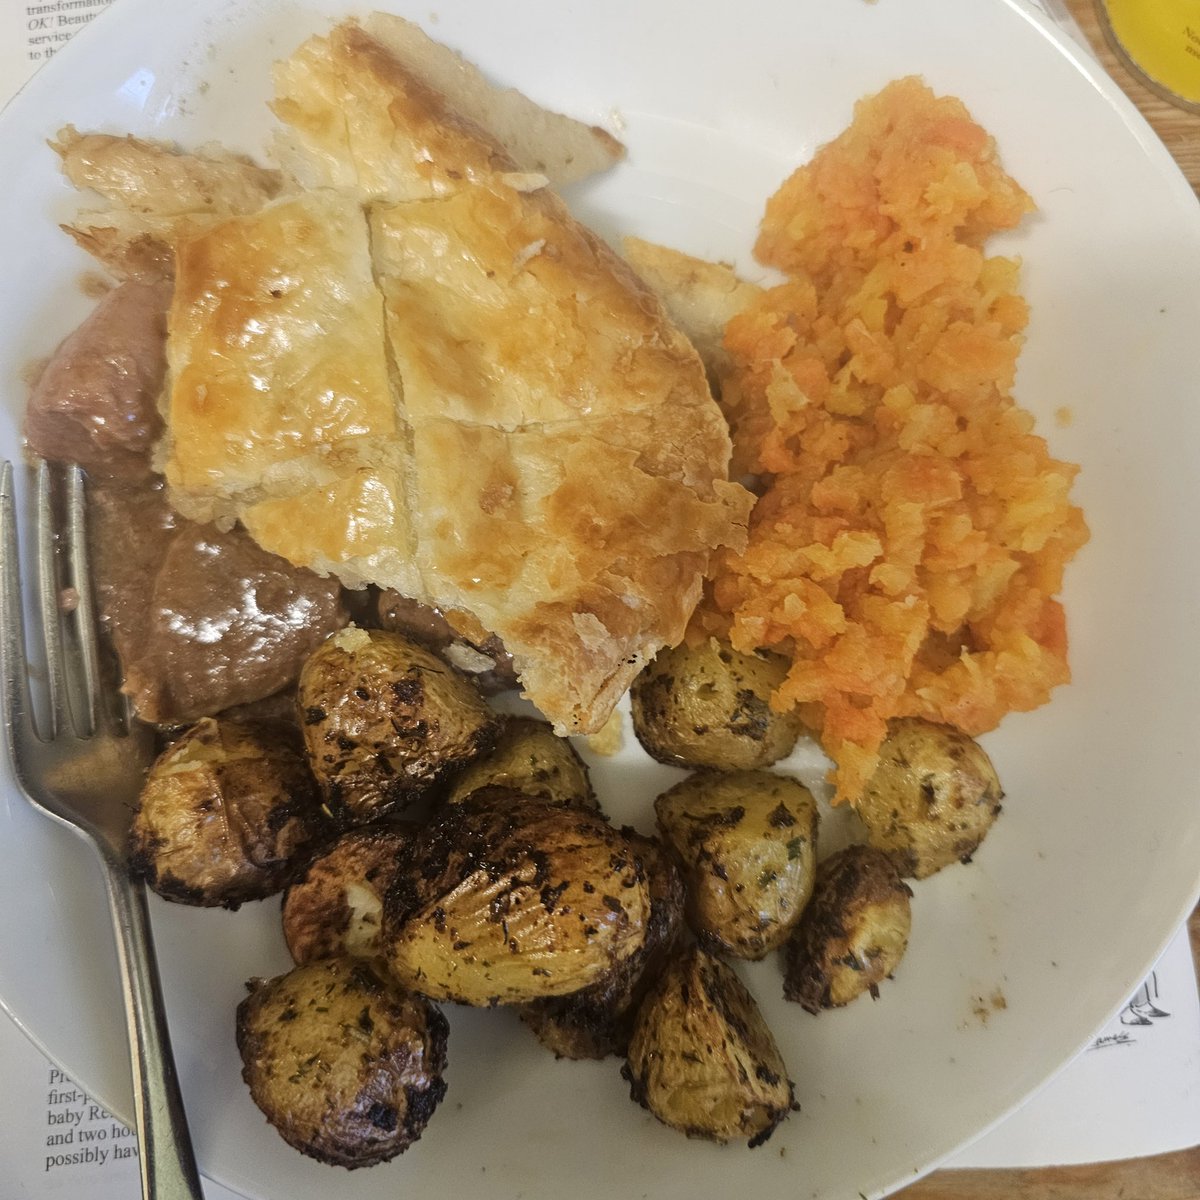 Bought it, cooked it, ate it. Should be enough for one lot of leftovers after Bairn's come in and had their share. The leftovers are mine! This butchers steak pie, mashed carrot, and neeps and air-fryed garlicky potatoes was exactly everything I was looking forward to. Who else…